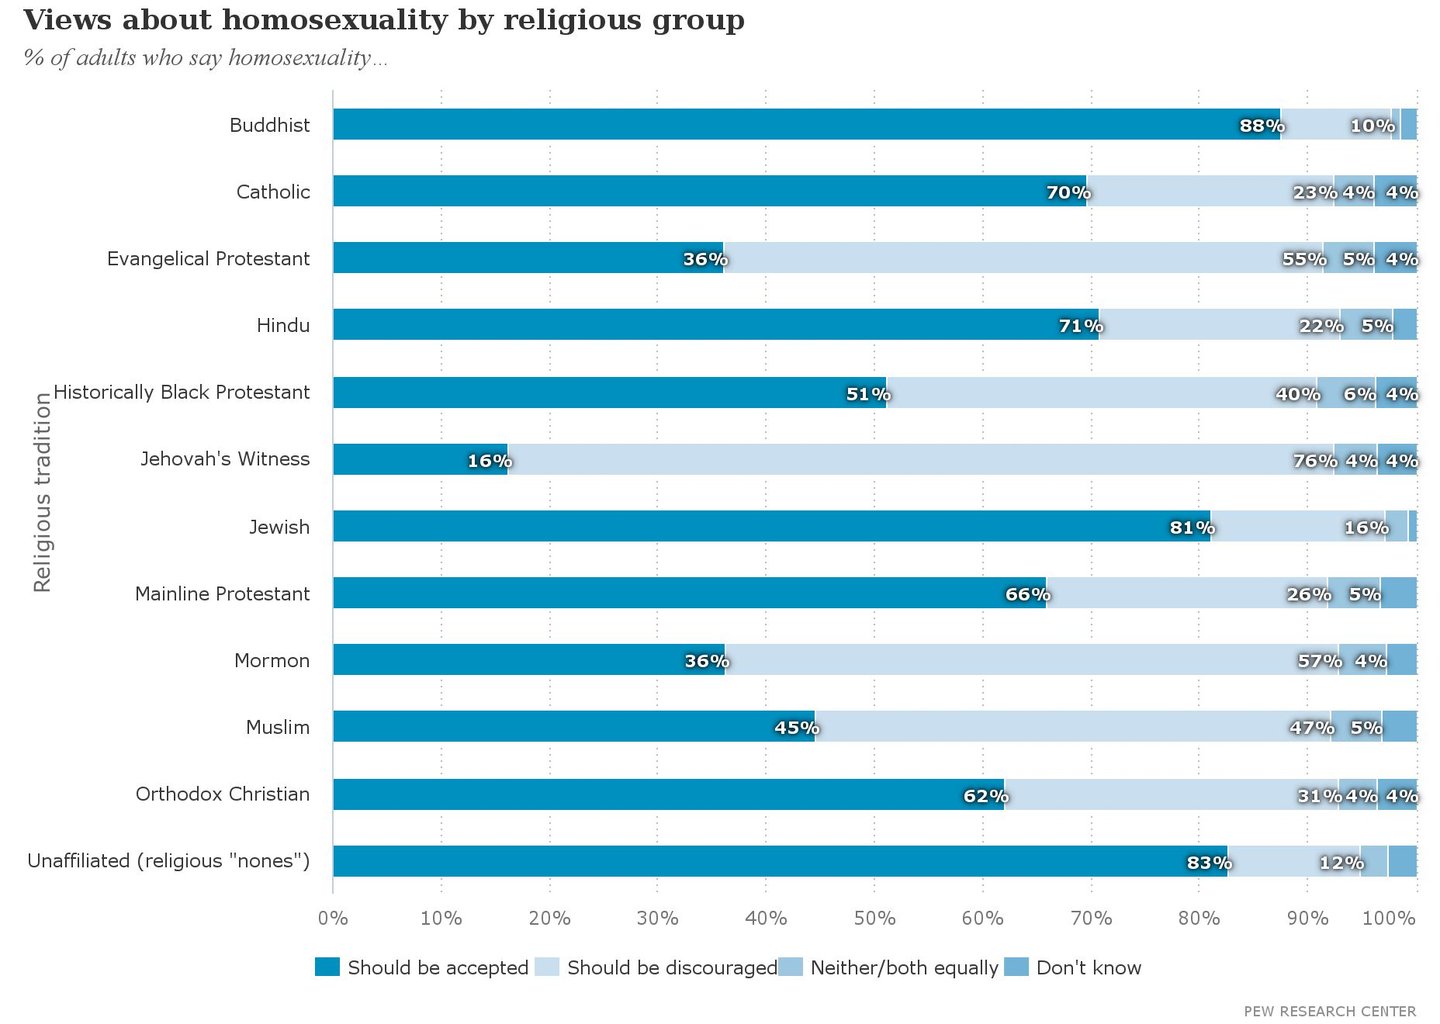 Views_about_homosexuality_by_religious_group